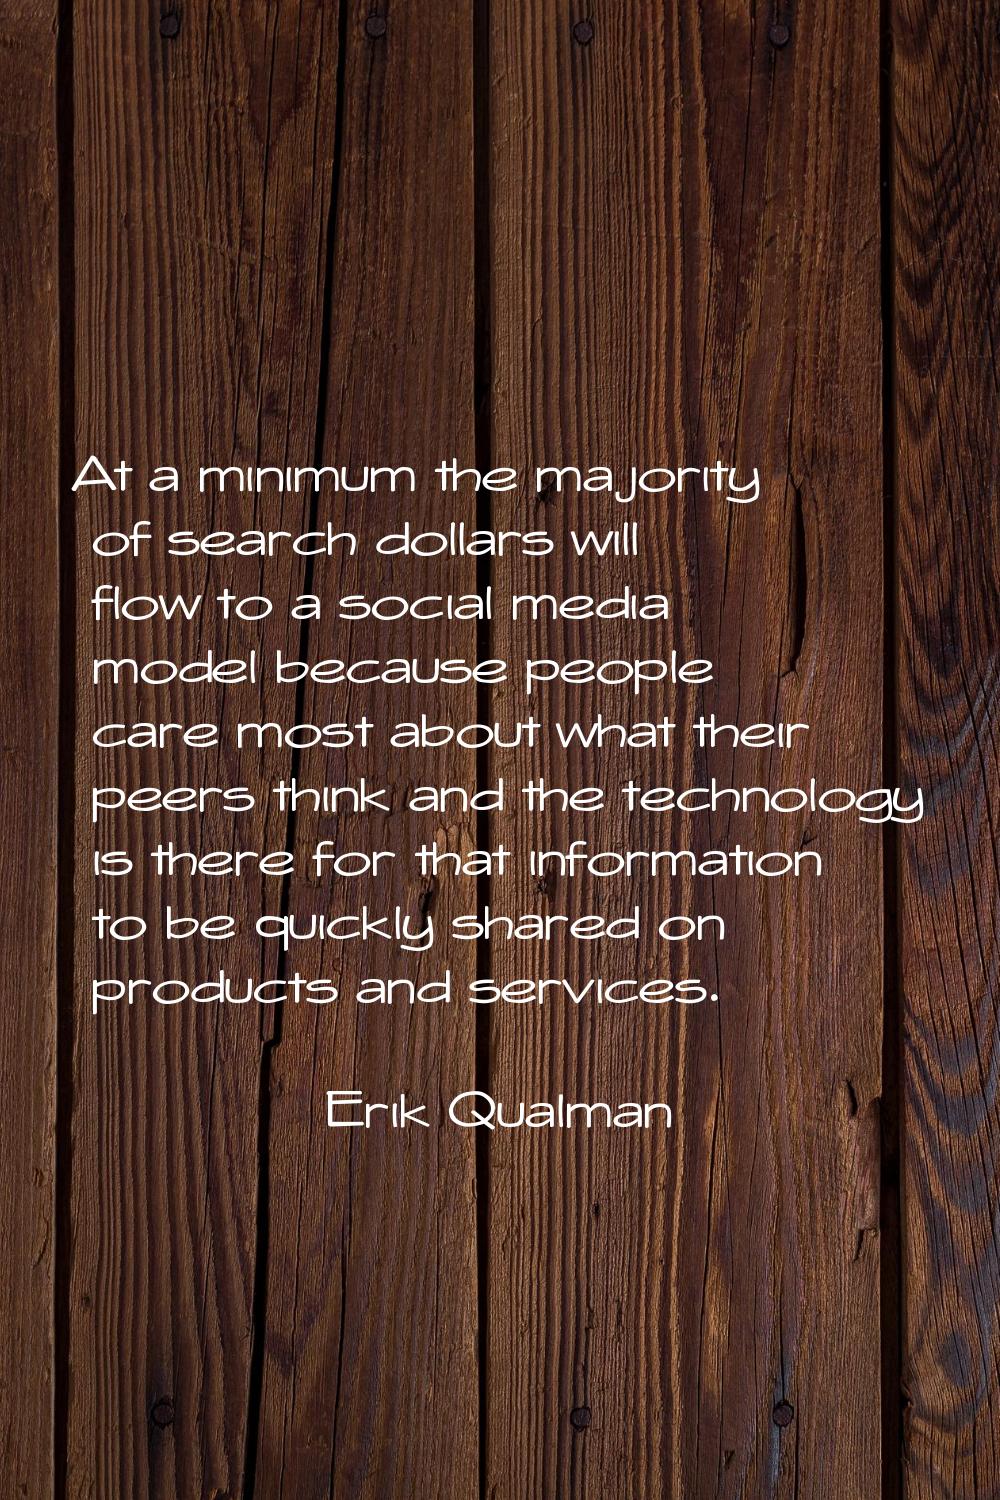 At a minimum the majority of search dollars will flow to a social media model because people care m